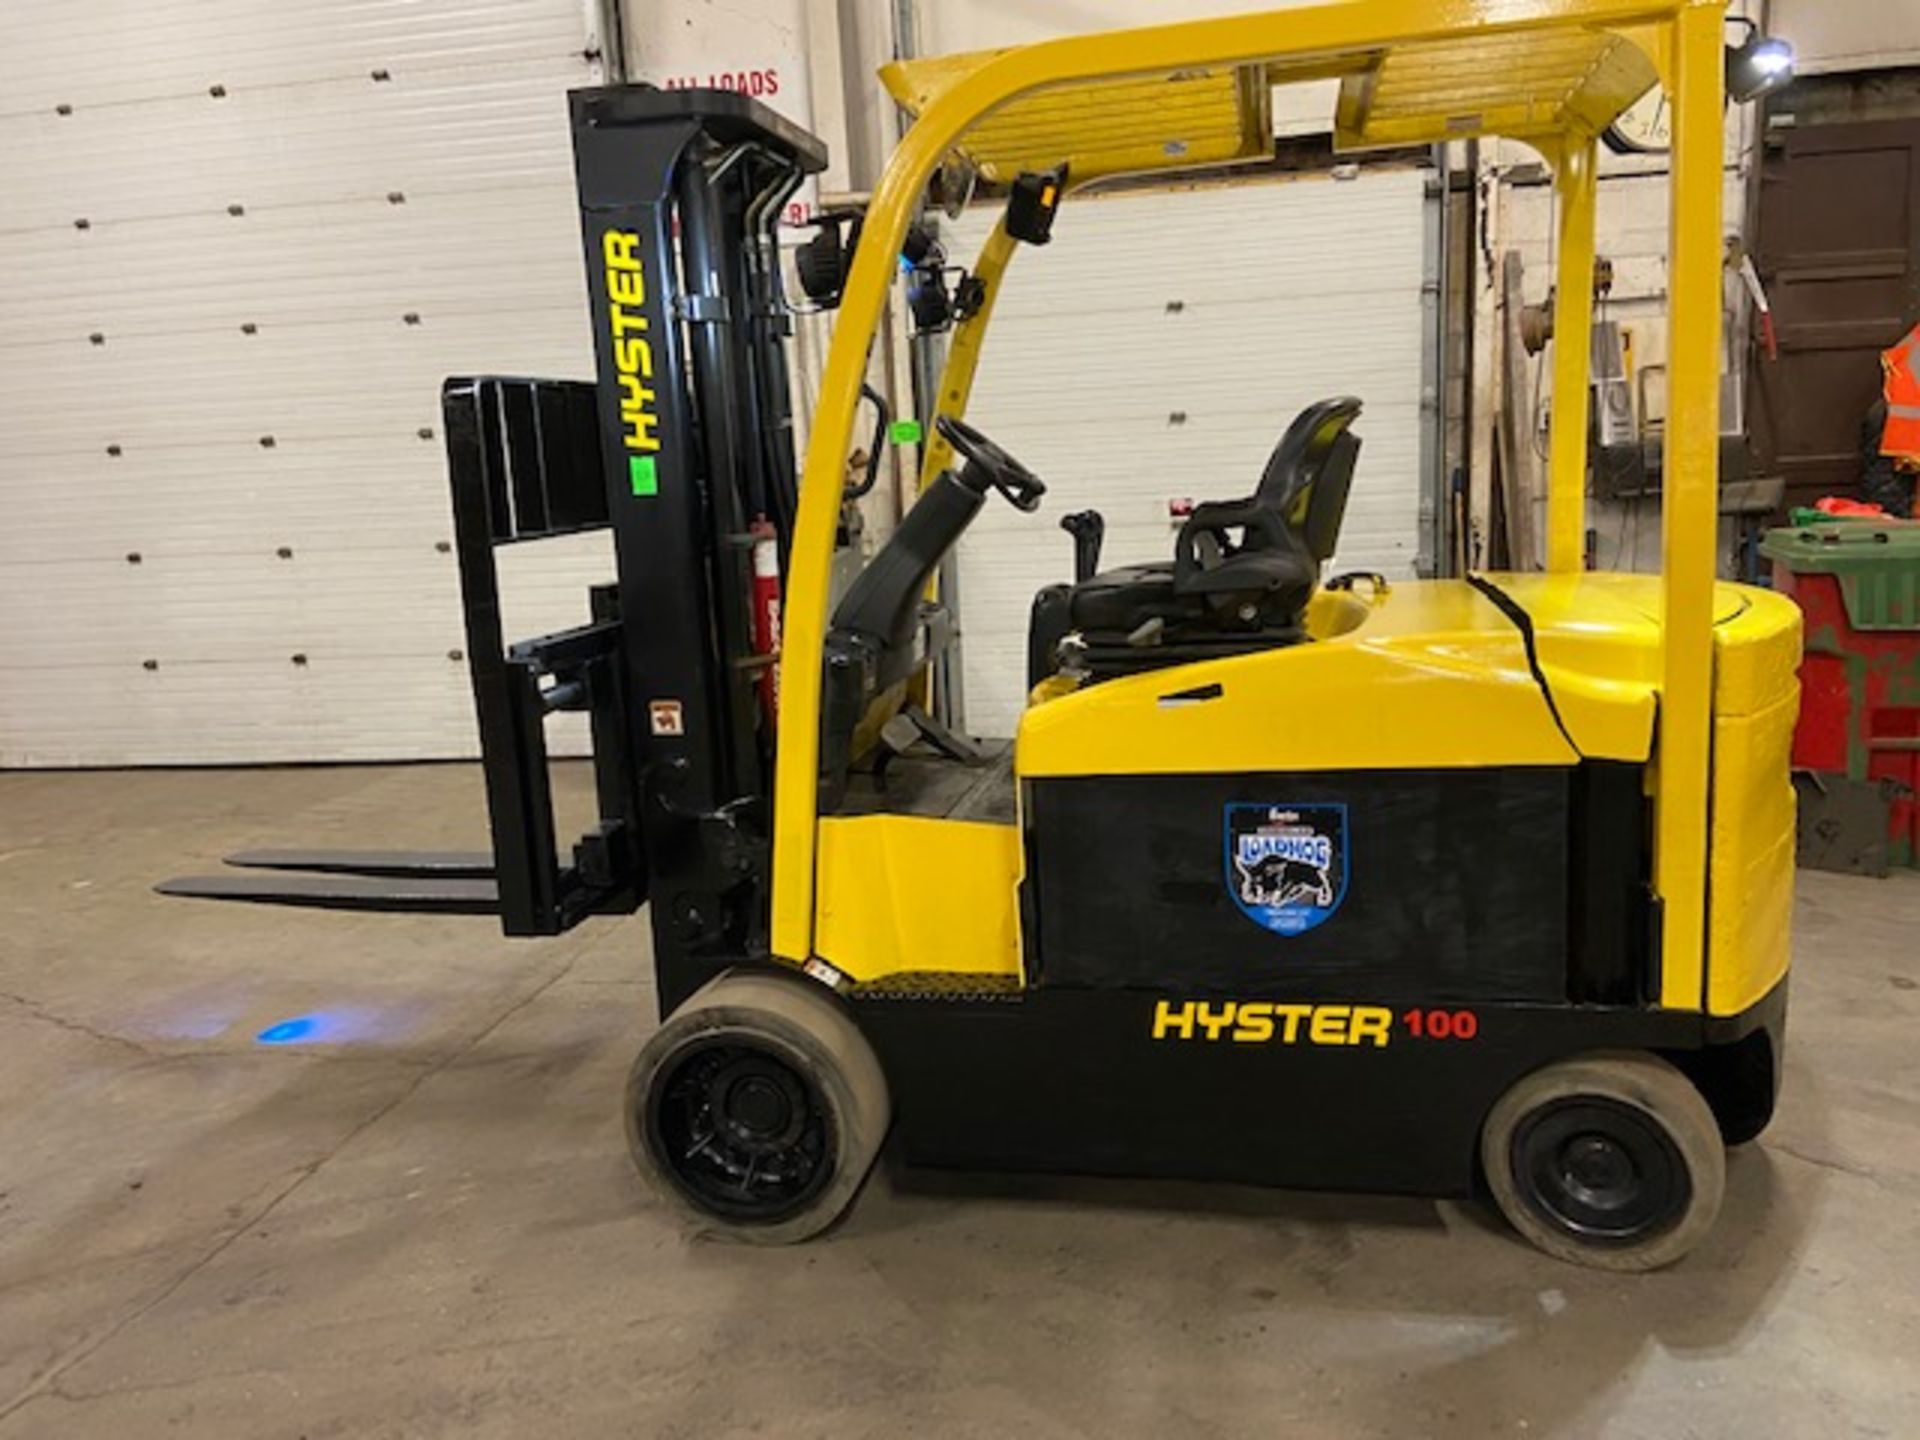 FREE CUSTOMS - 2014 Hyster 10000lbs Capacity Forklift Electric with sideshift and 3 stage mast & 54"